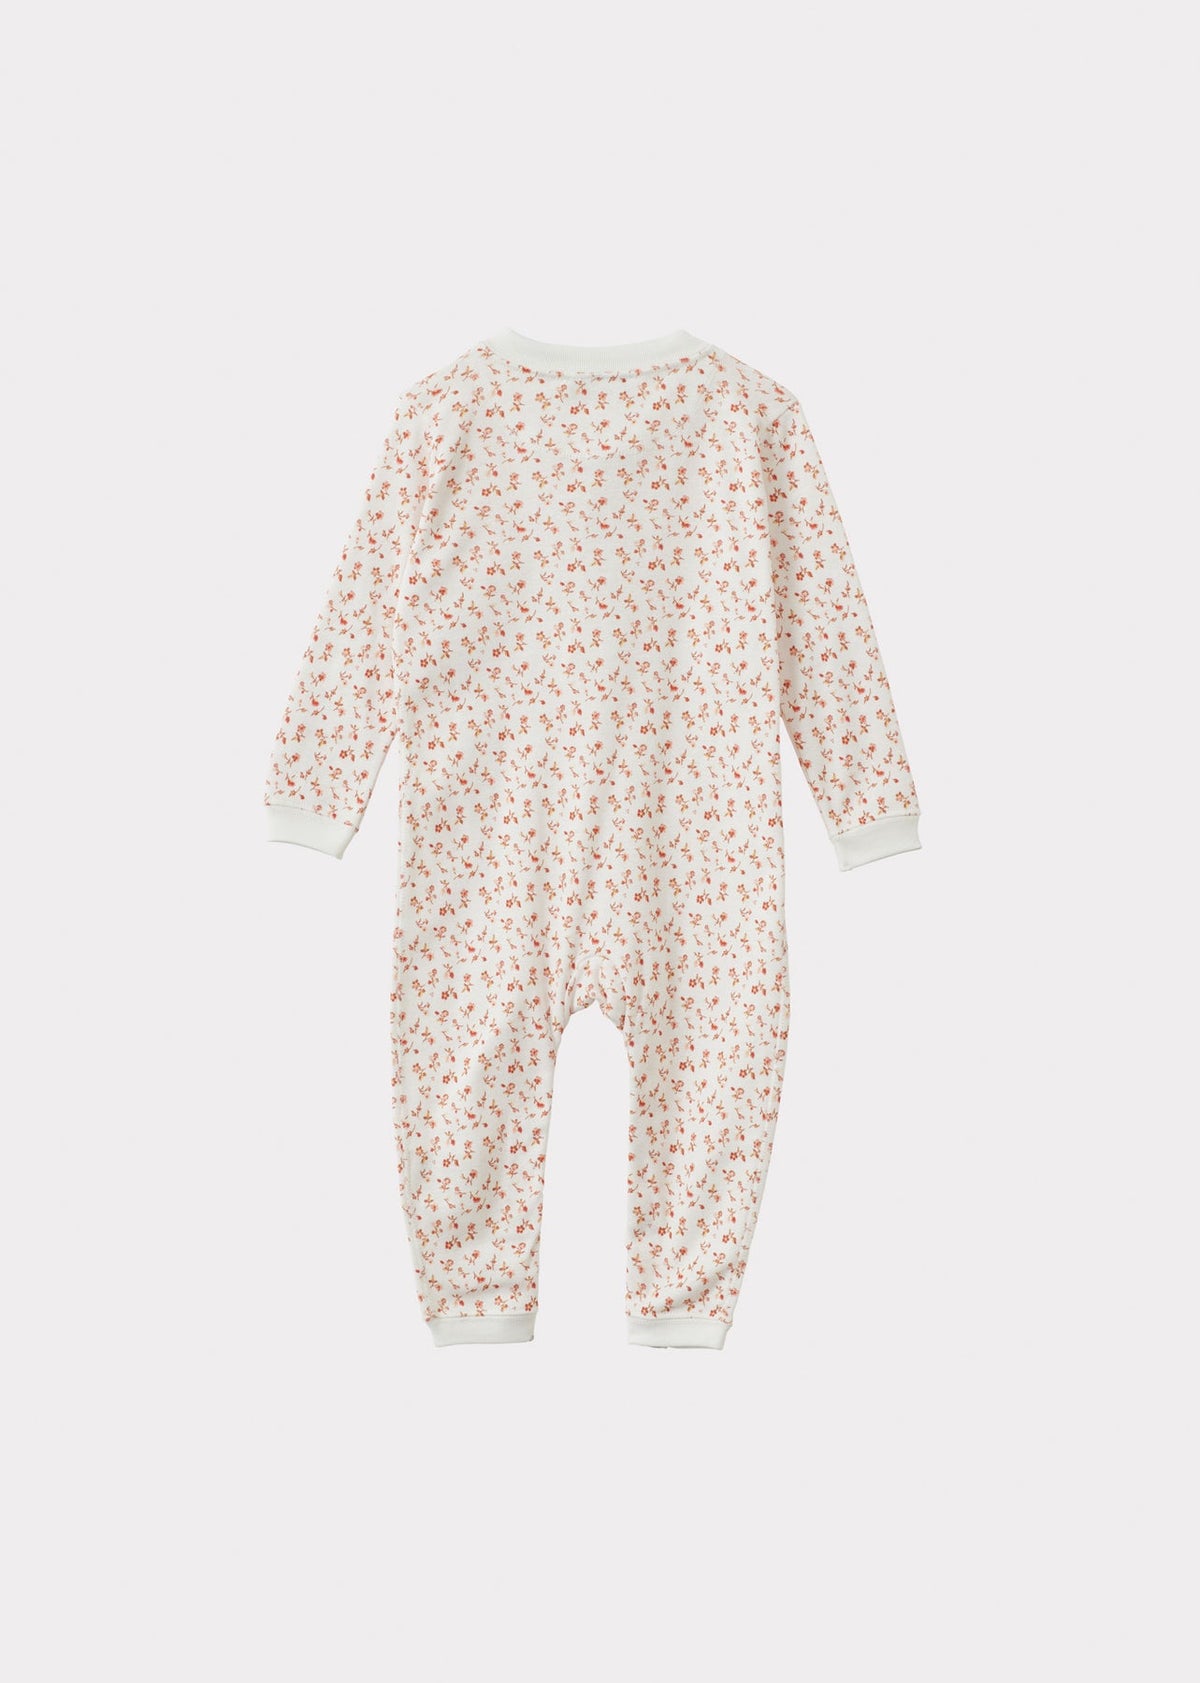 TOADFISH BABY ROMPER - DITSY FLORAL